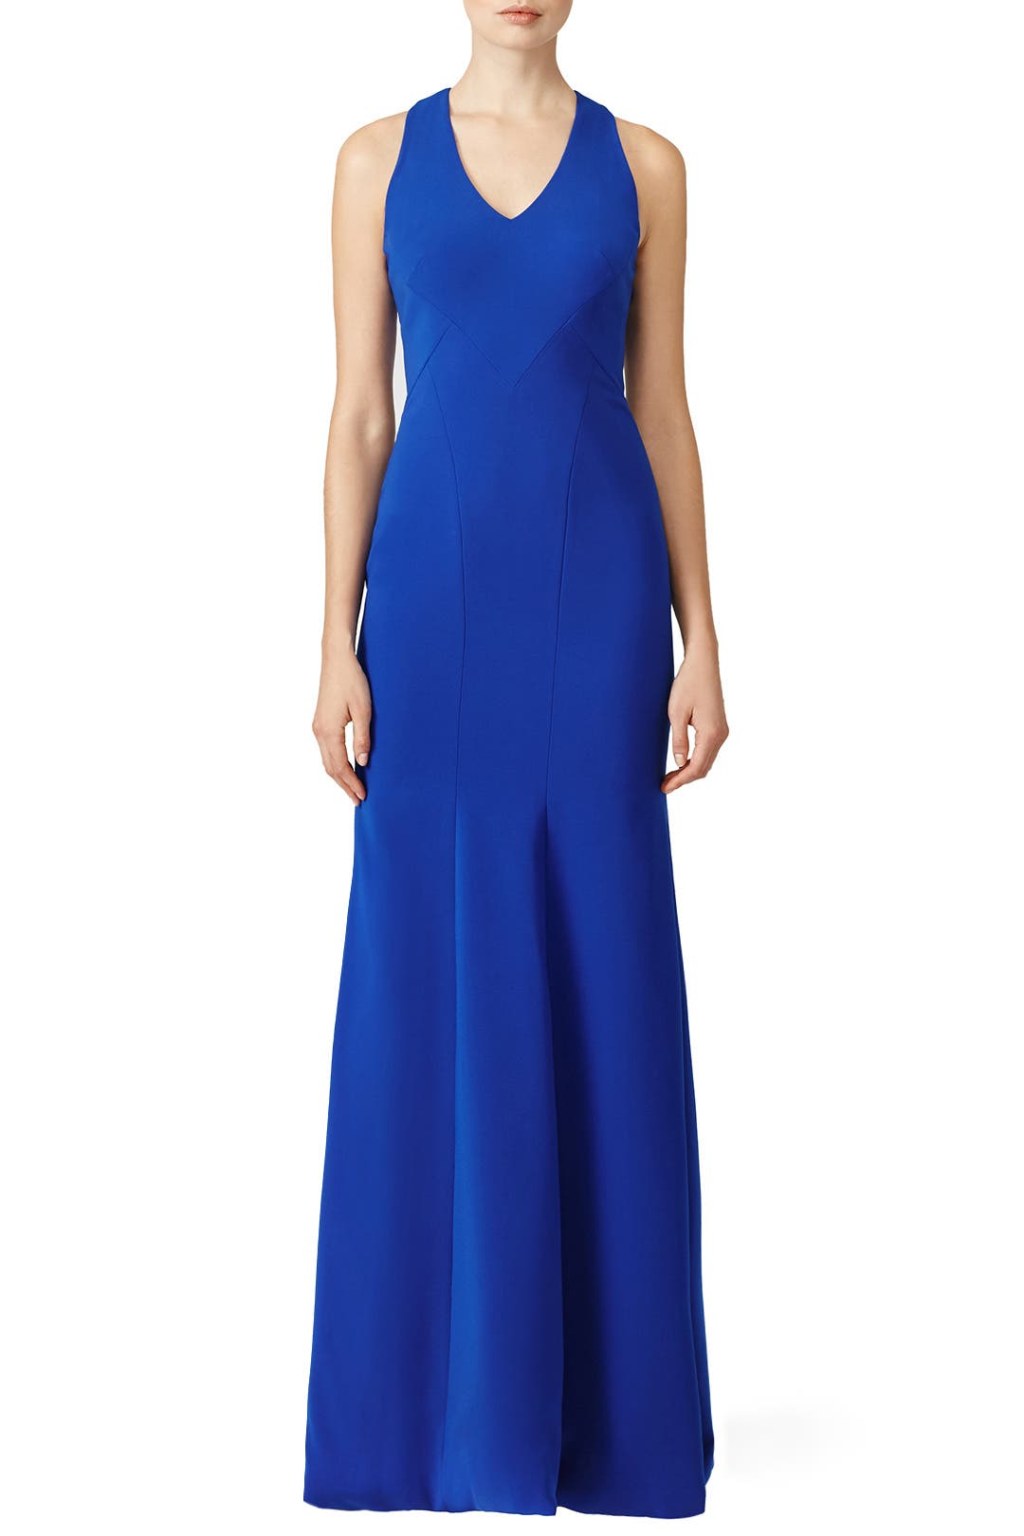 Picture of: Cobalt Smooth Mermaid Gown by Theia for $  Rent the Runway